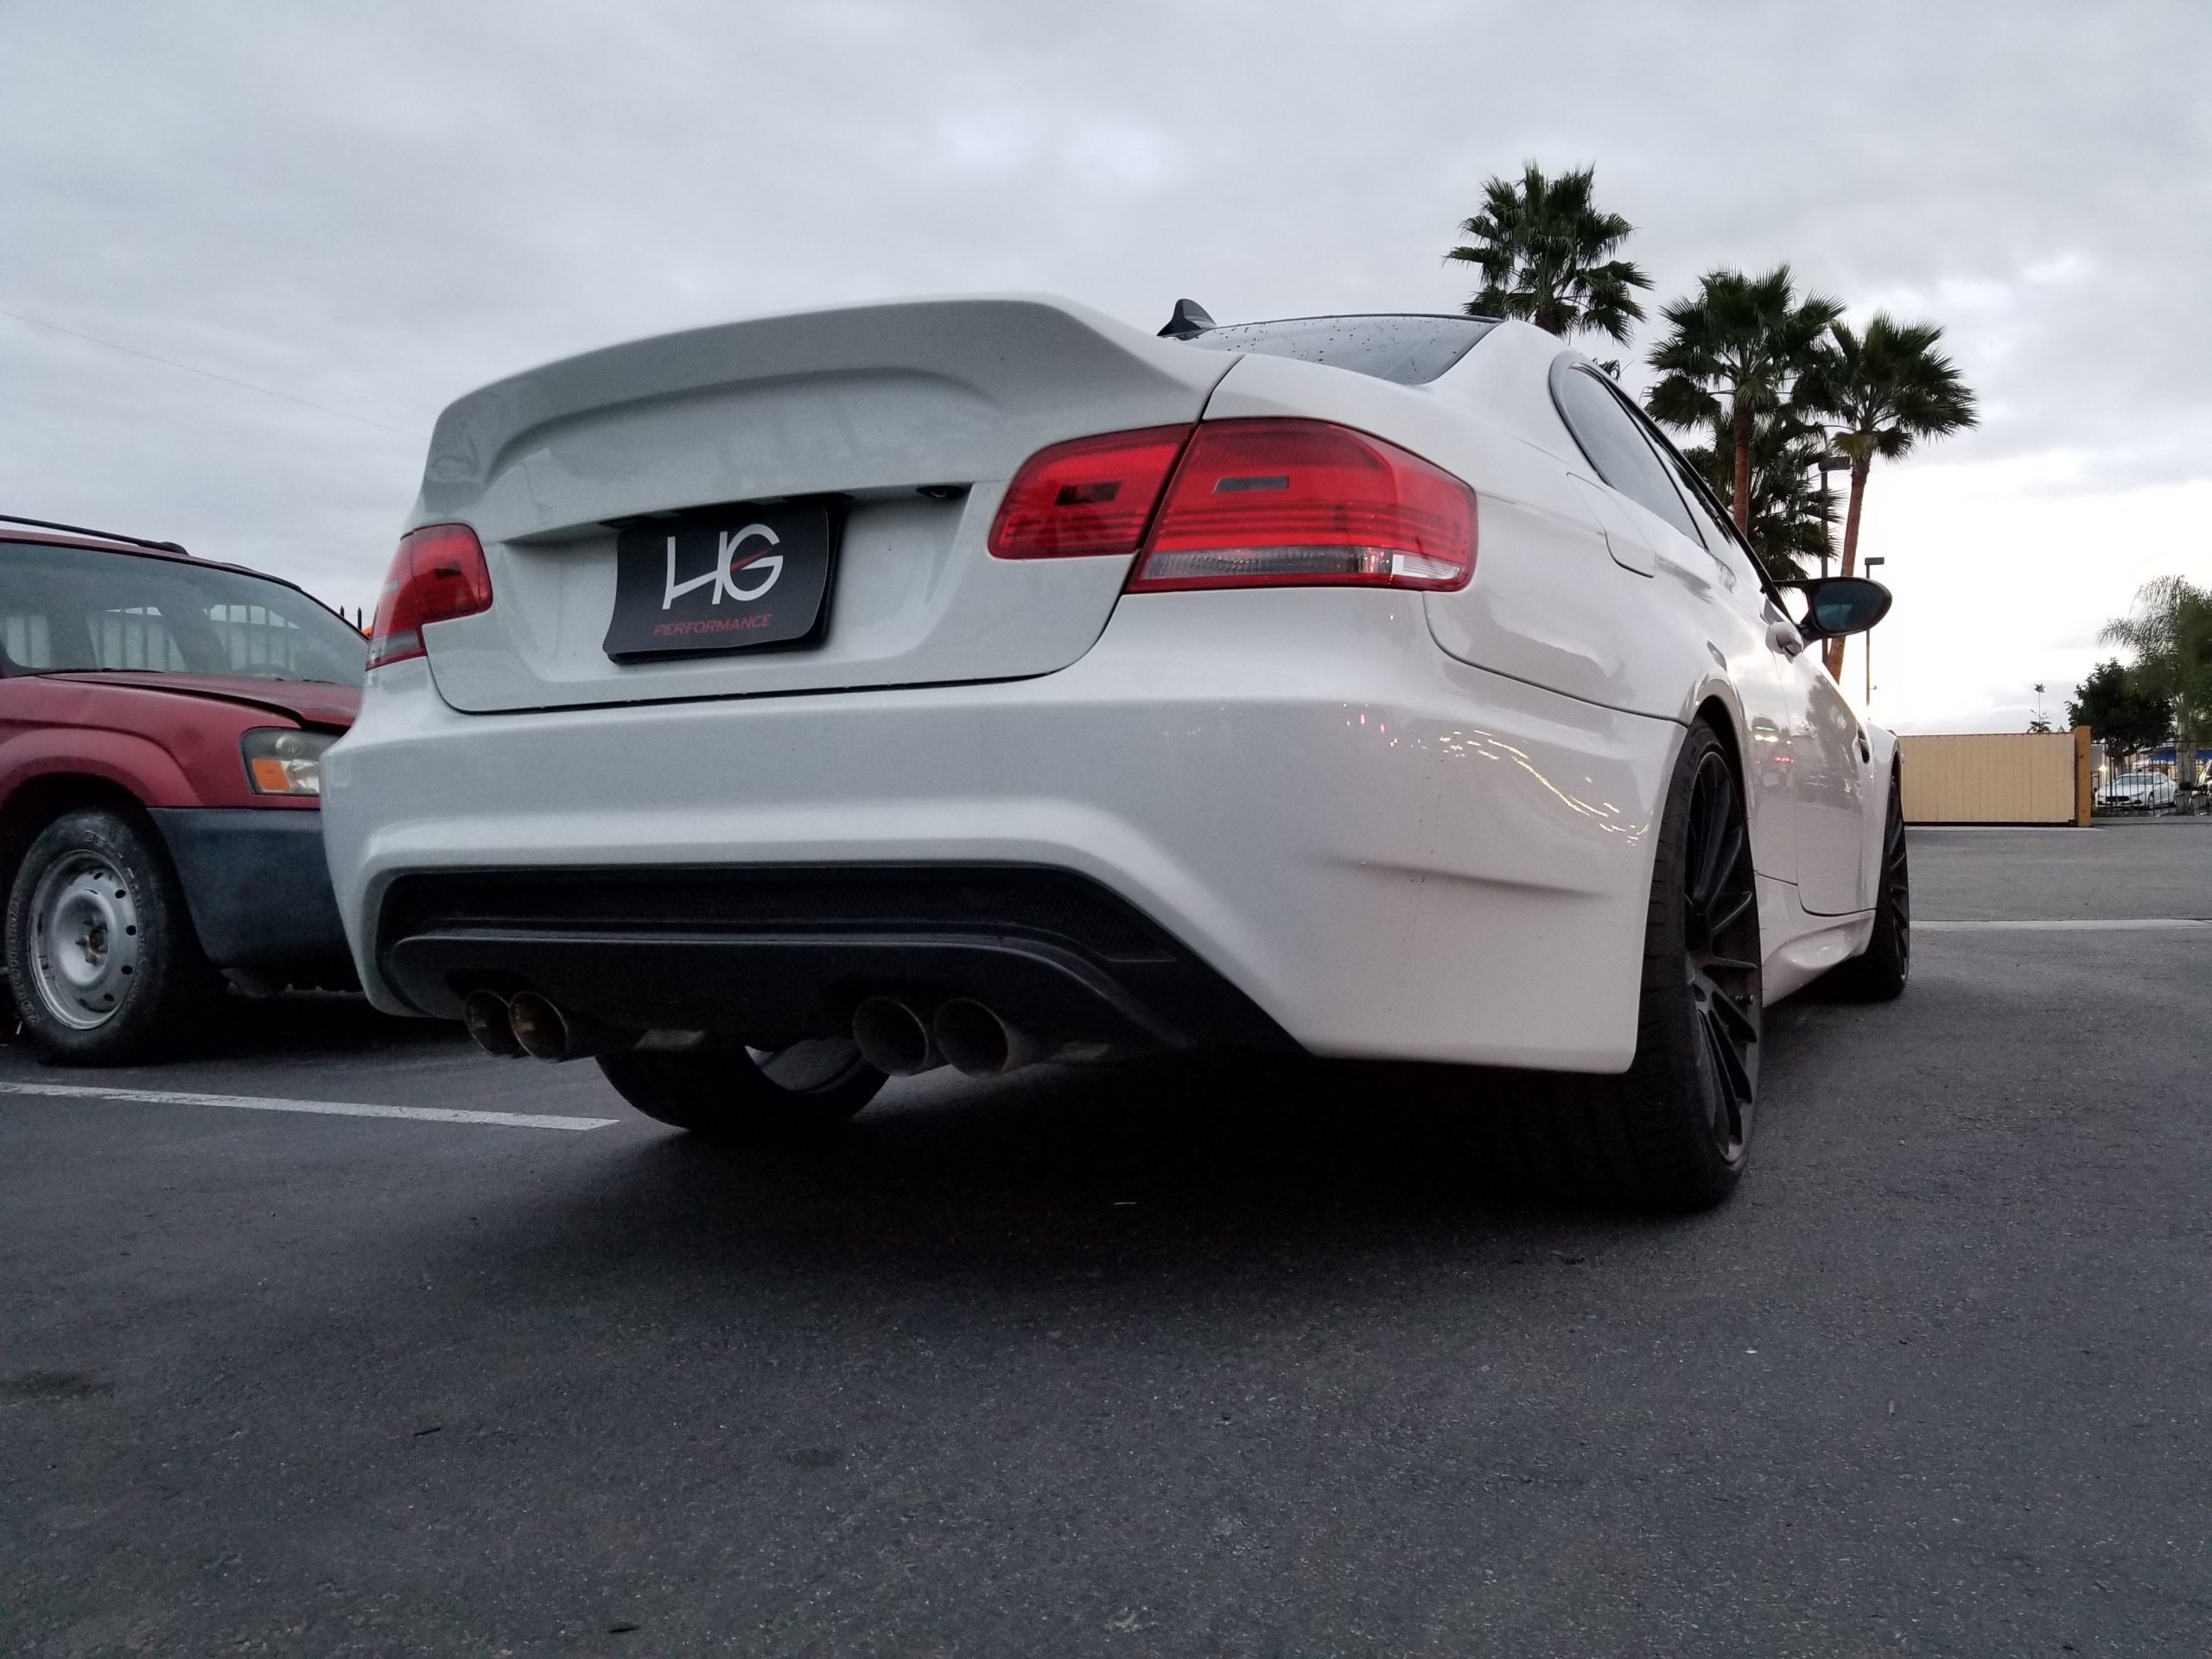 BMW at HG Performance in San Diego